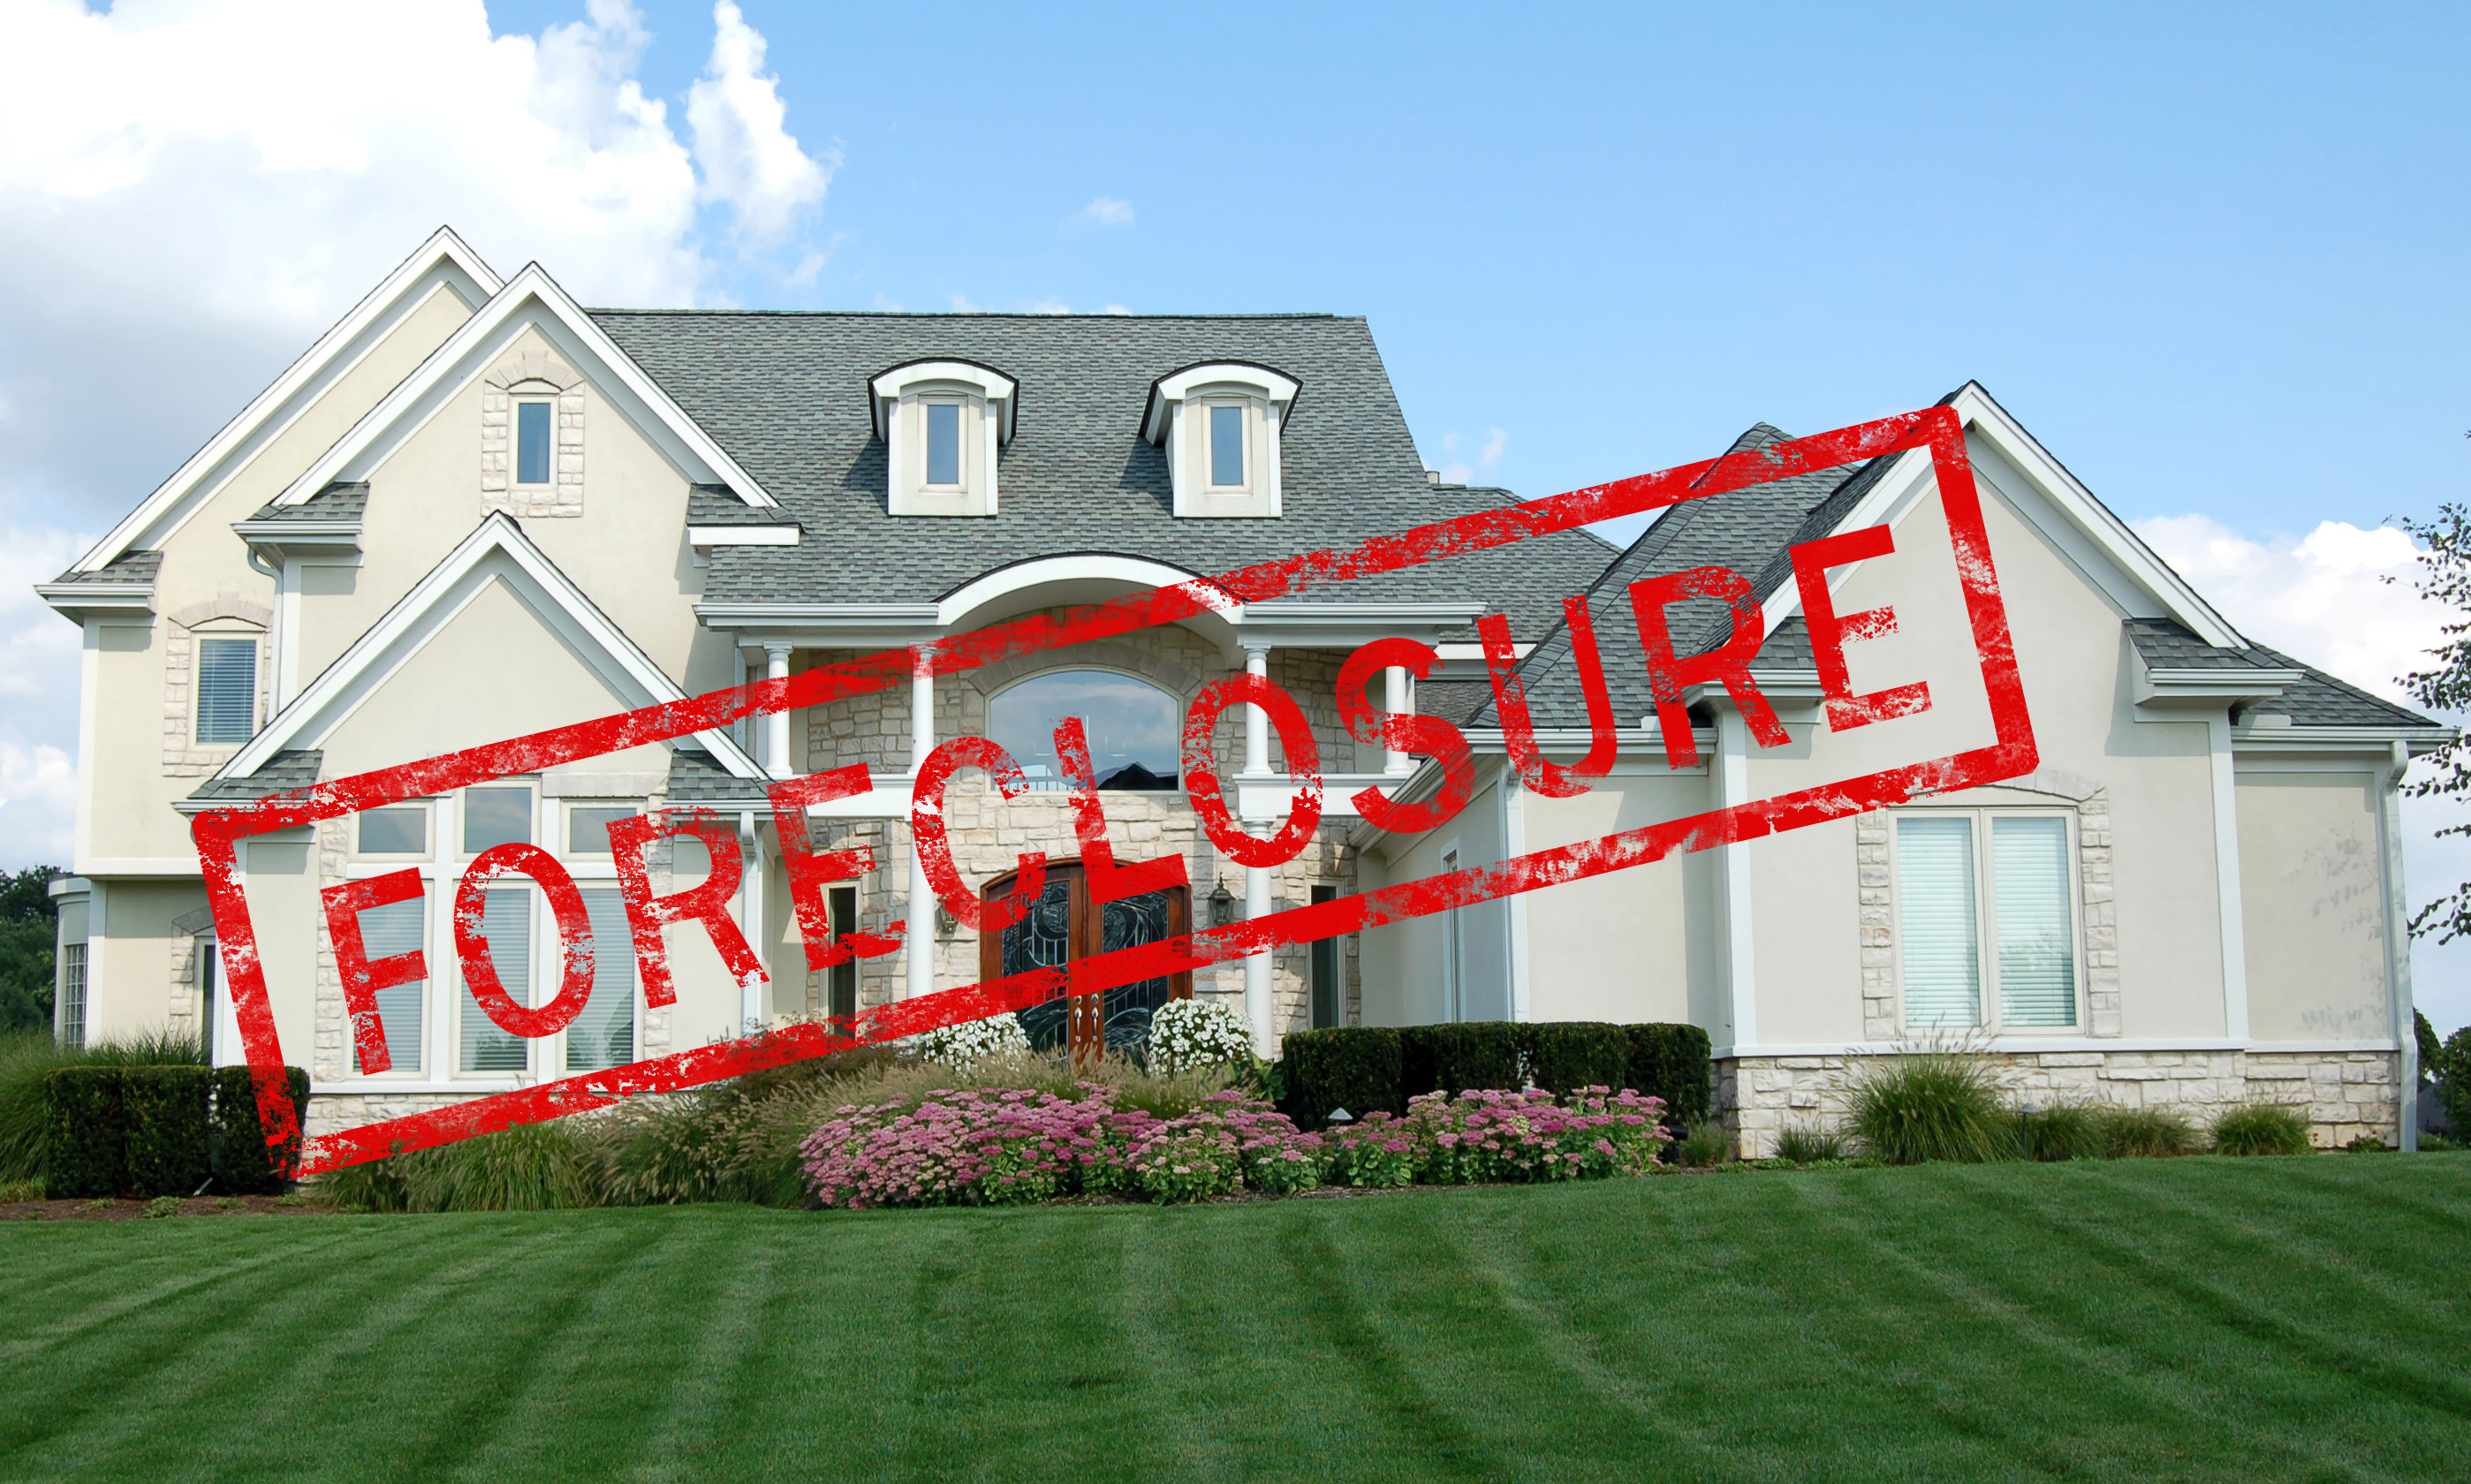 Call C-H Appraisal Group to discuss valuations for Knox foreclosures